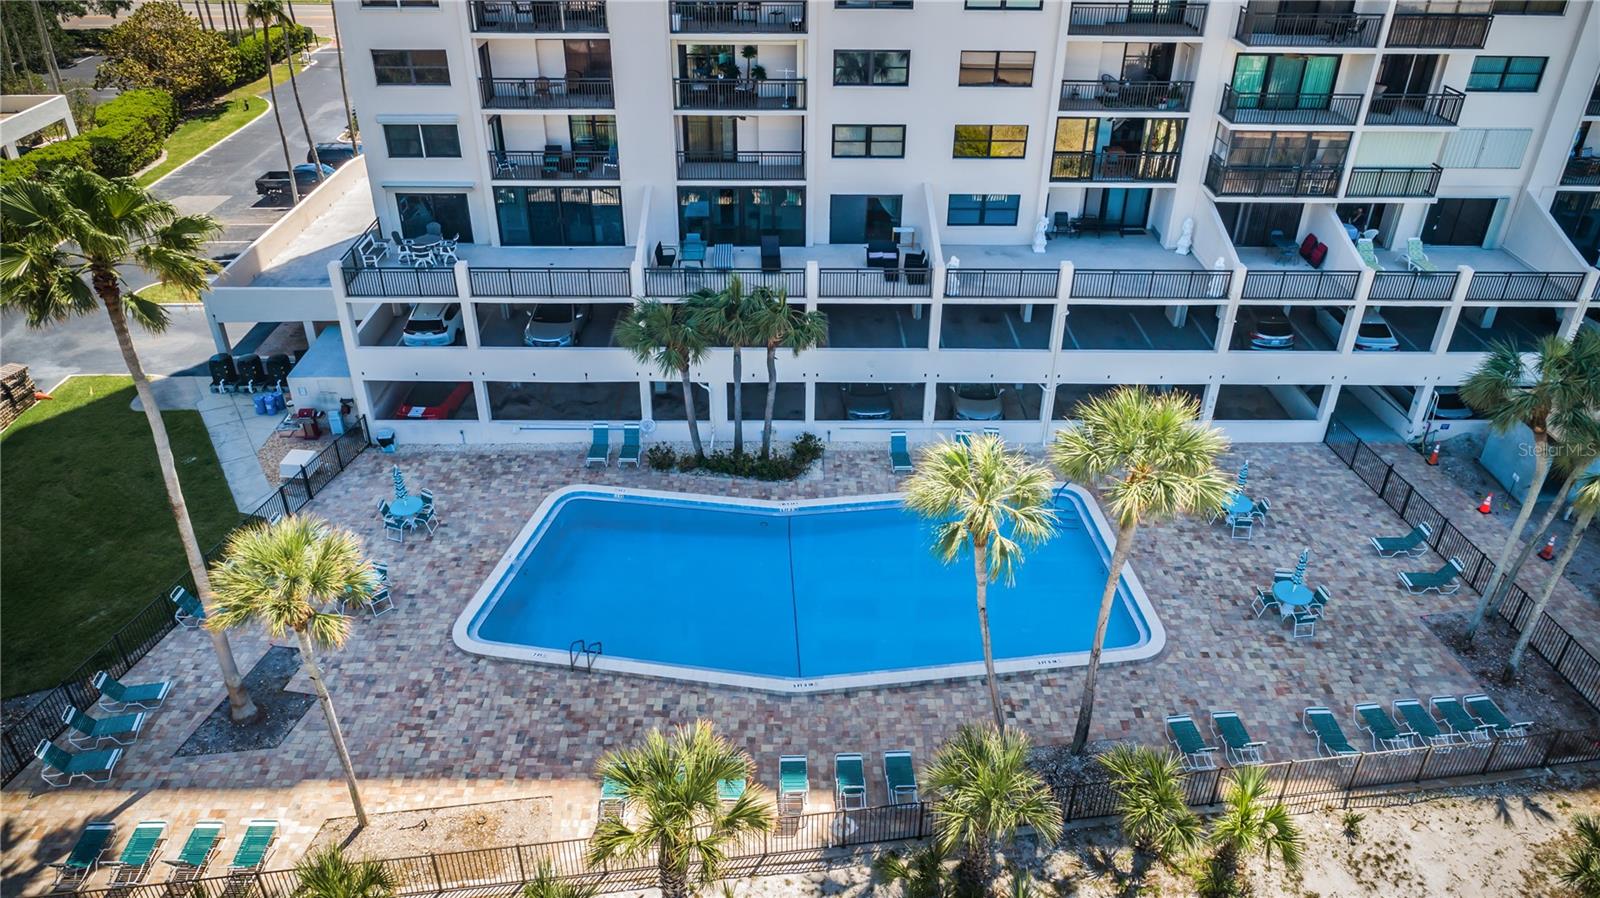 Aerial view of pool and rear of condo